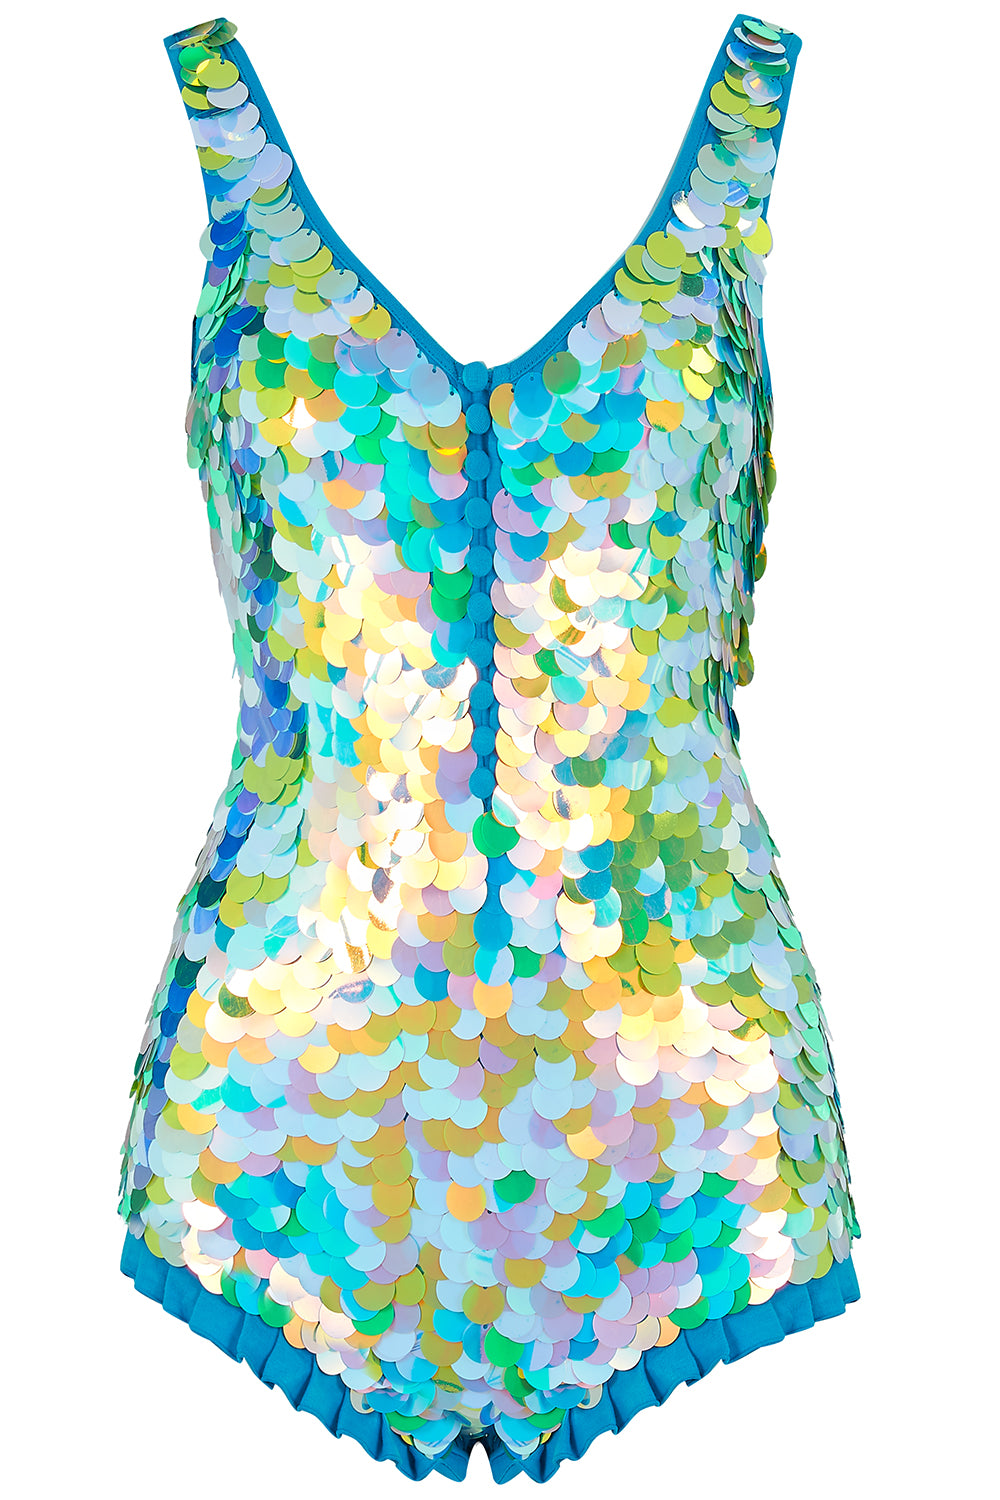 a blue and green sequin playsuit